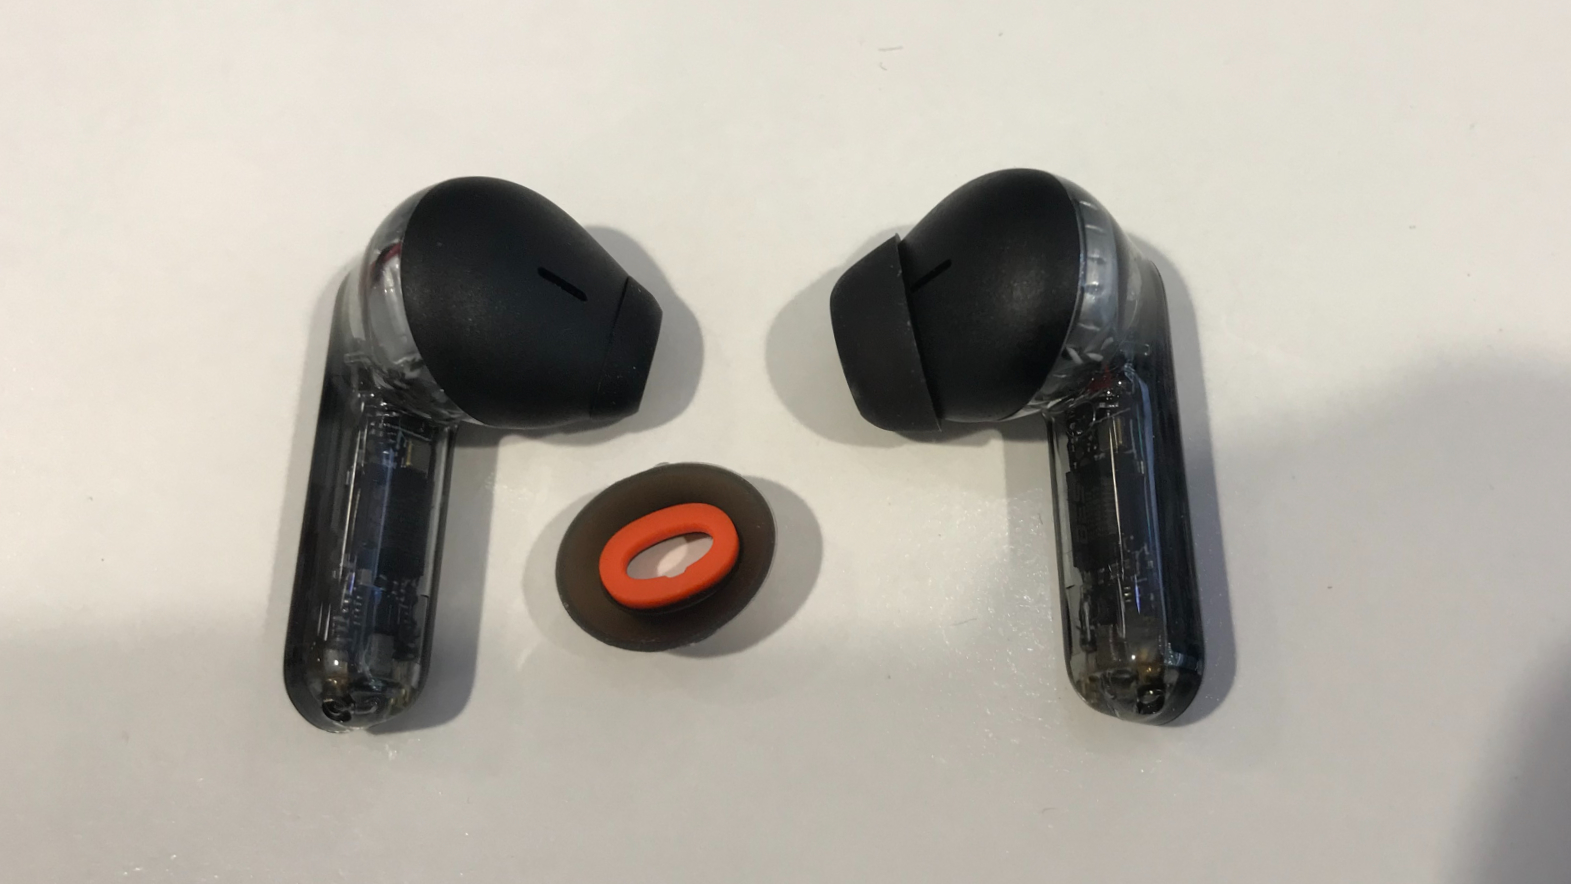 JBL Tune Flex earbuds with open earbud on left, closed on right earbud